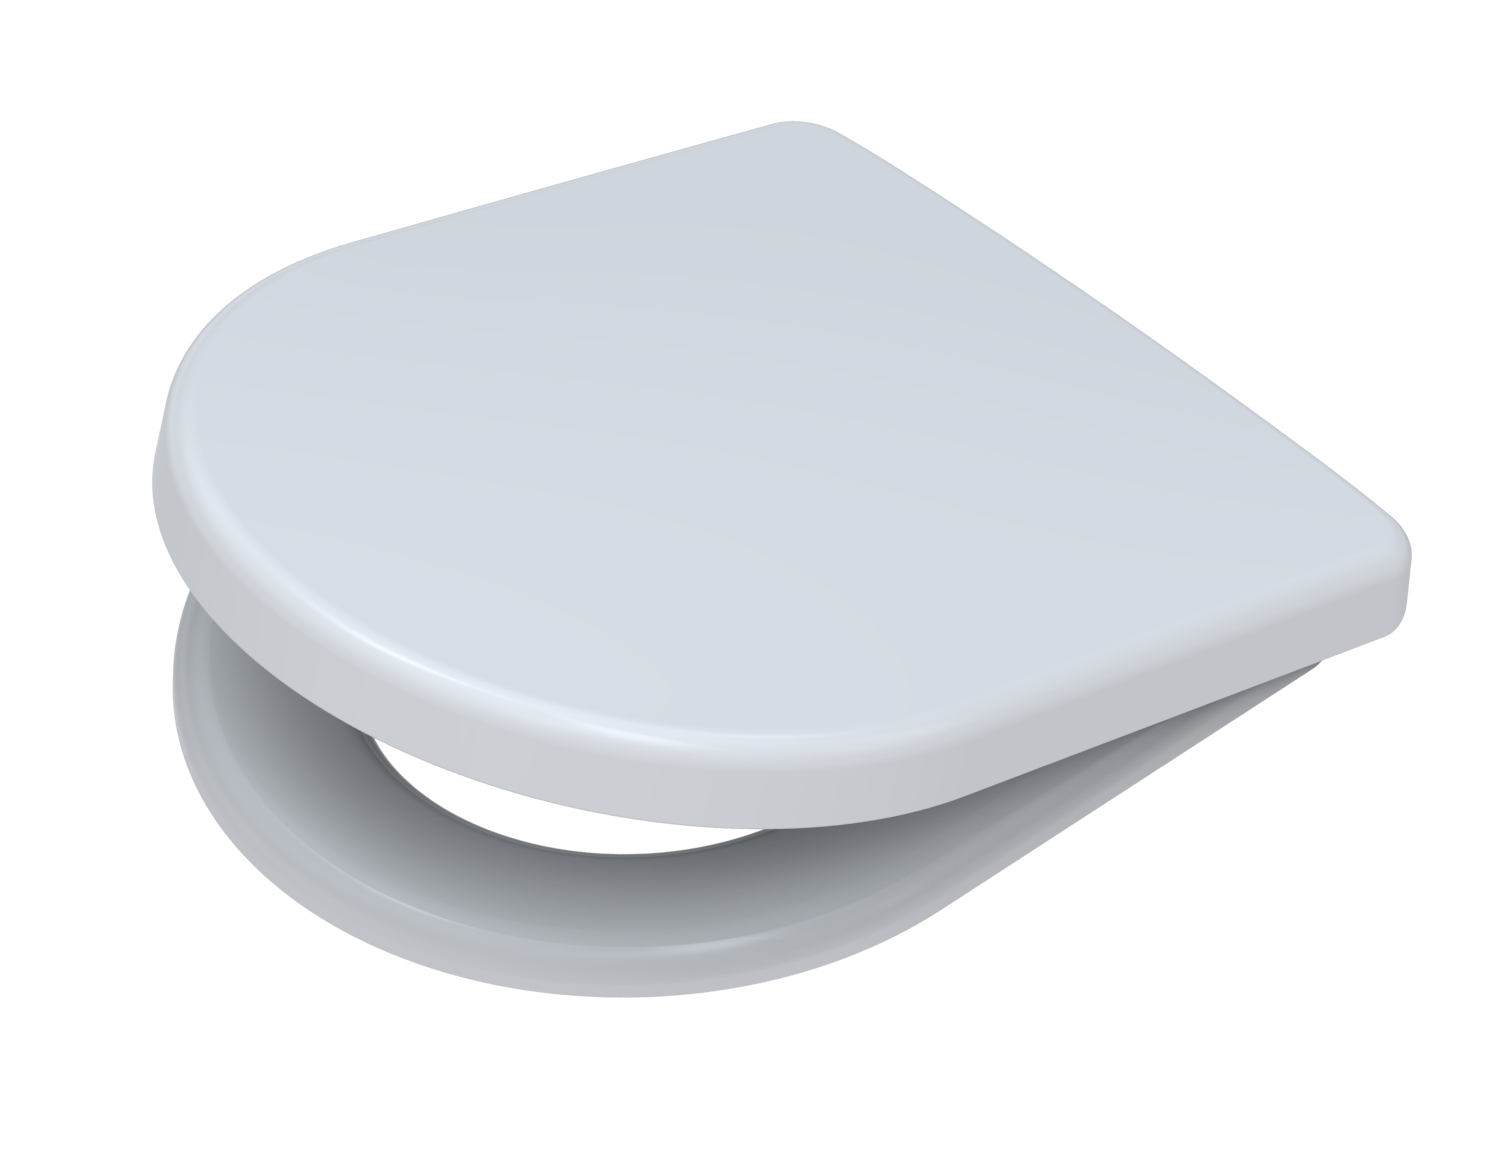 Picture of PAGETTE Subline toilet seat with integr. soft close, removable with click-o-matic 795370902 white